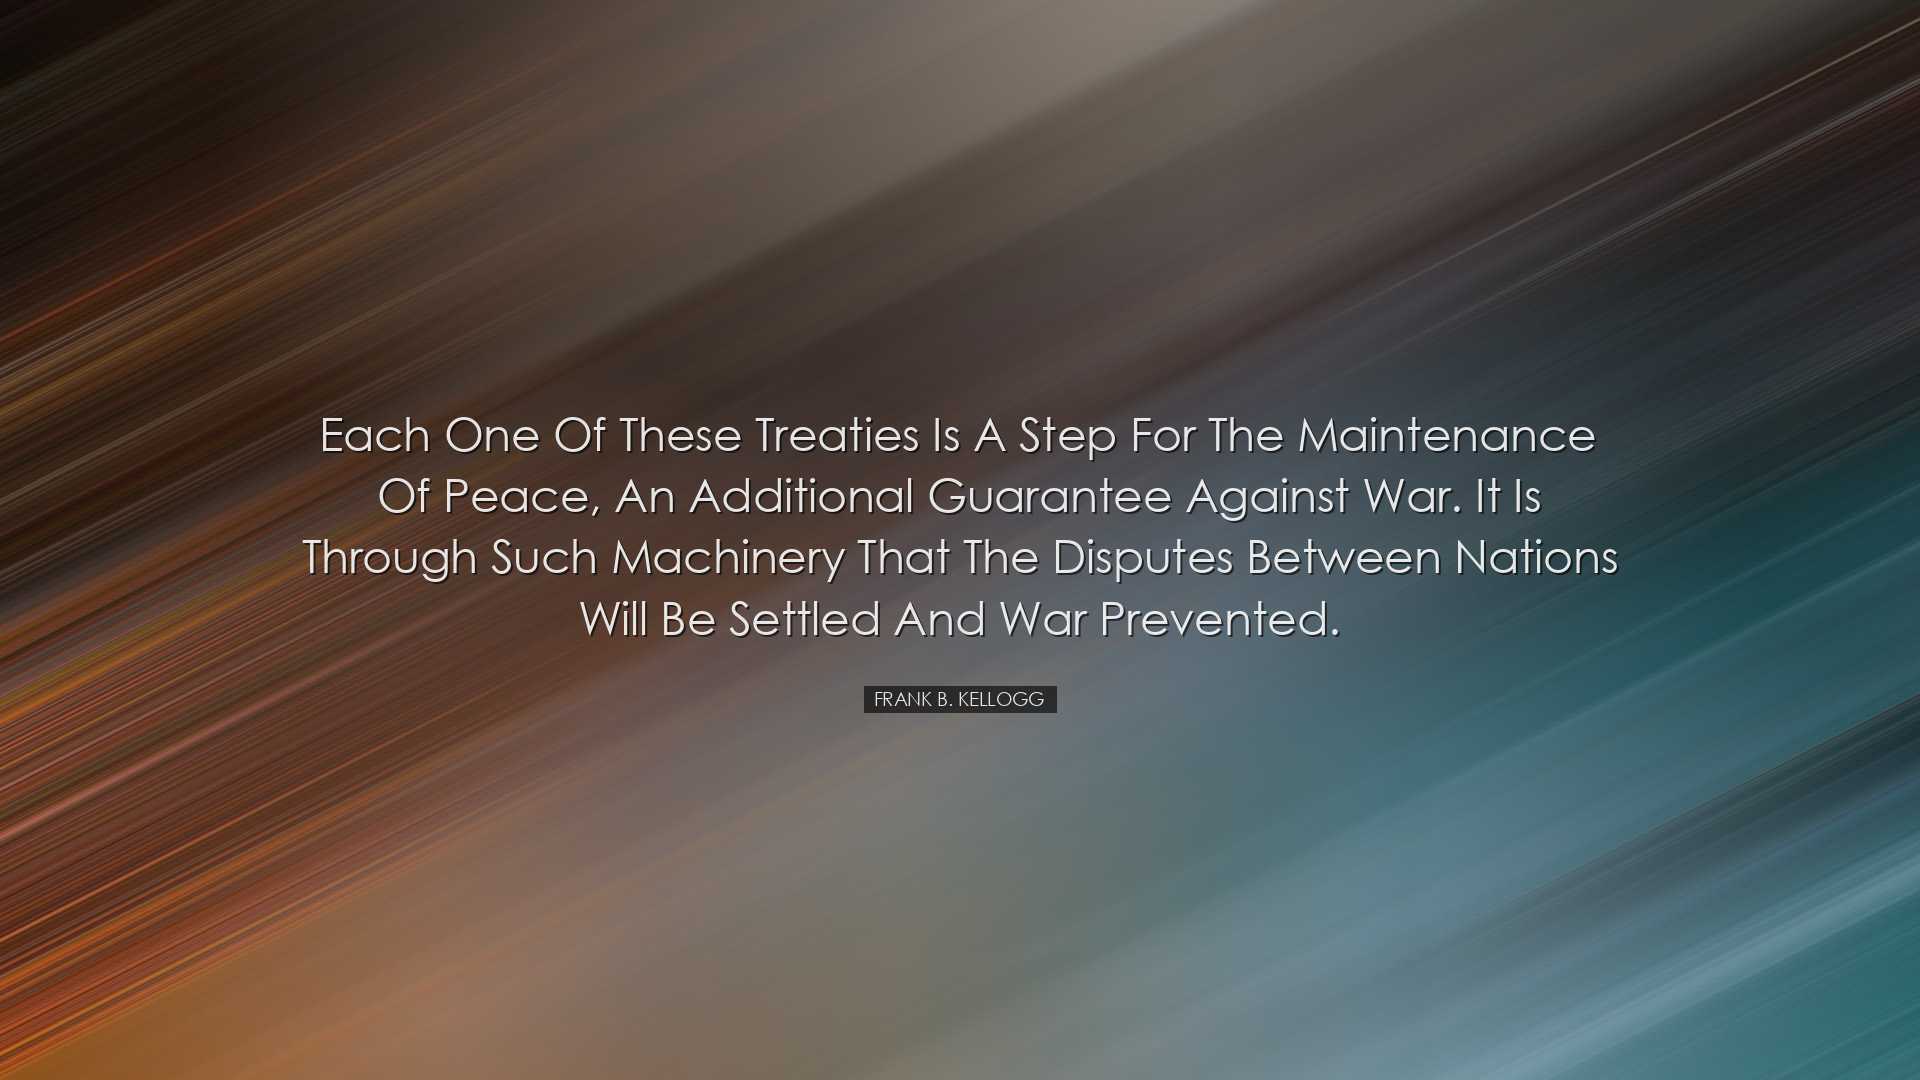 Each one of these treaties is a step for the maintenance of peace,